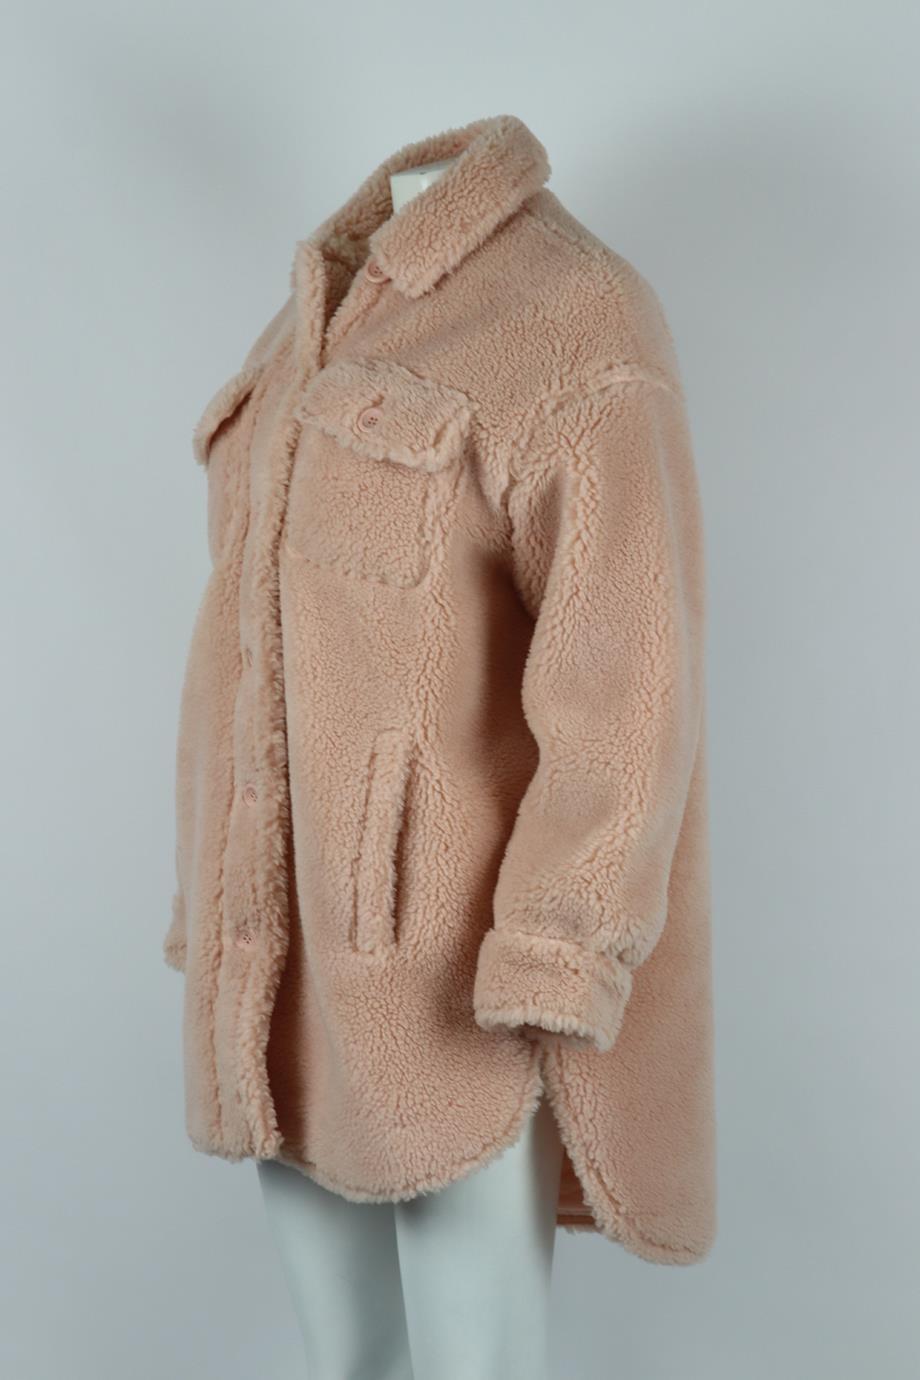 STAND STUDIOS OVERSIZED FAUX SHEARLING JACKET XSMALL